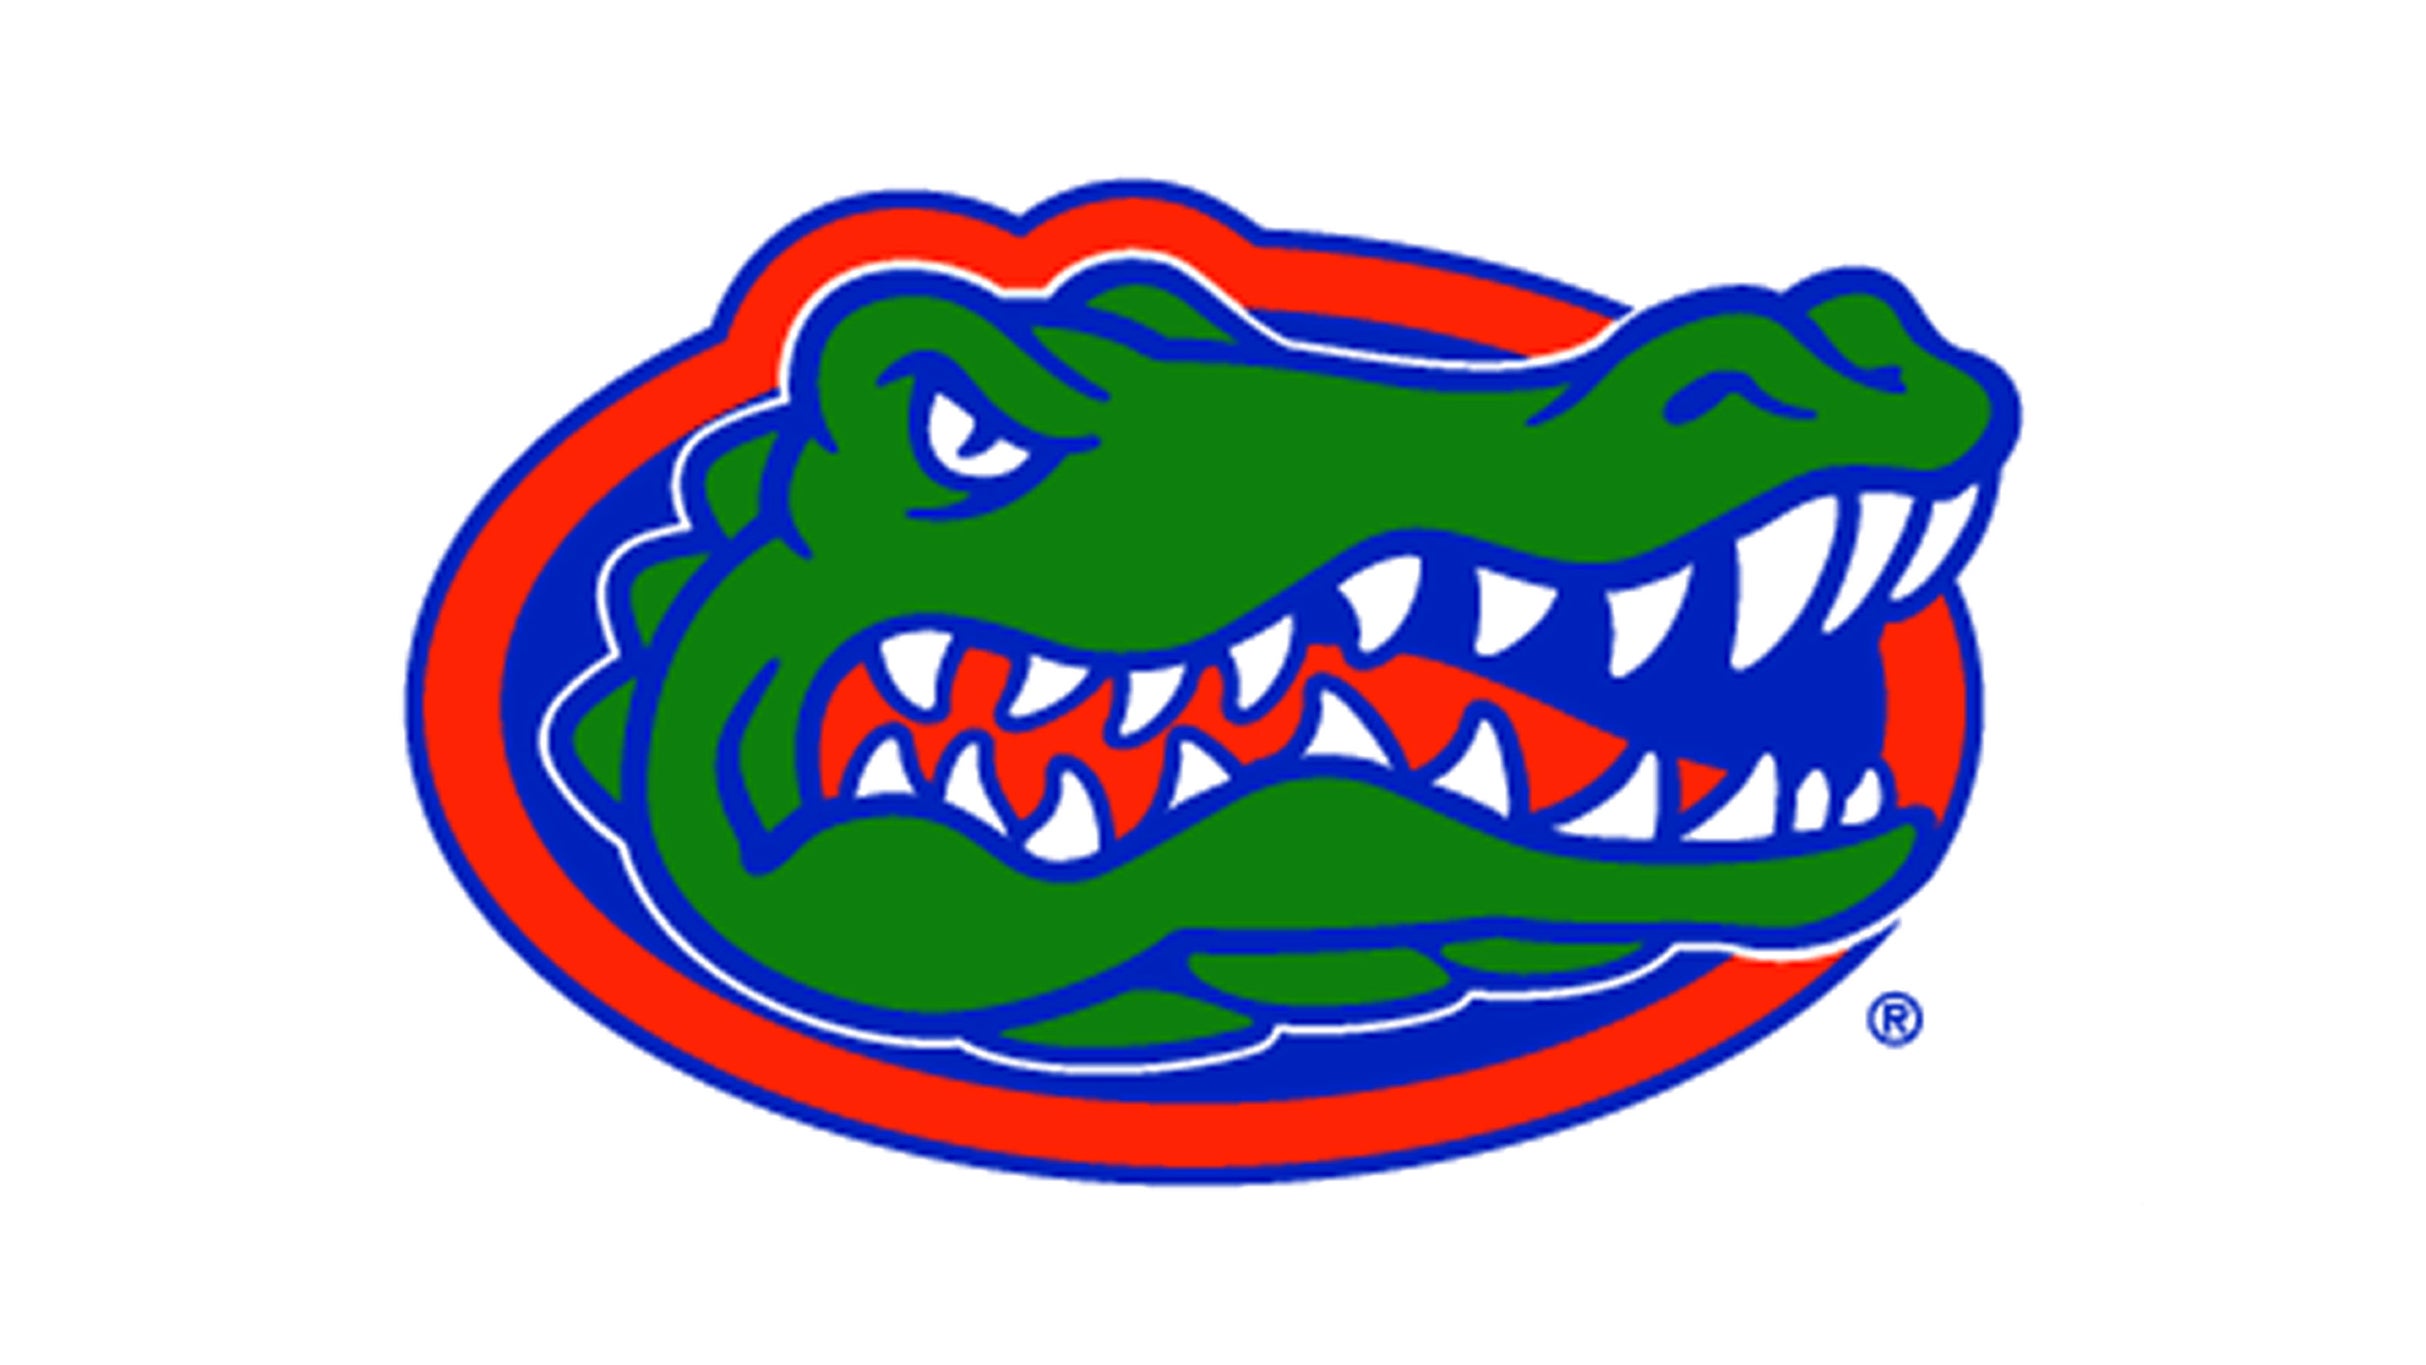 Florida Gators Football vs. Ole Miss Rebels Football in Gainesville promo photo for Official Platinum Onsale presale offer code